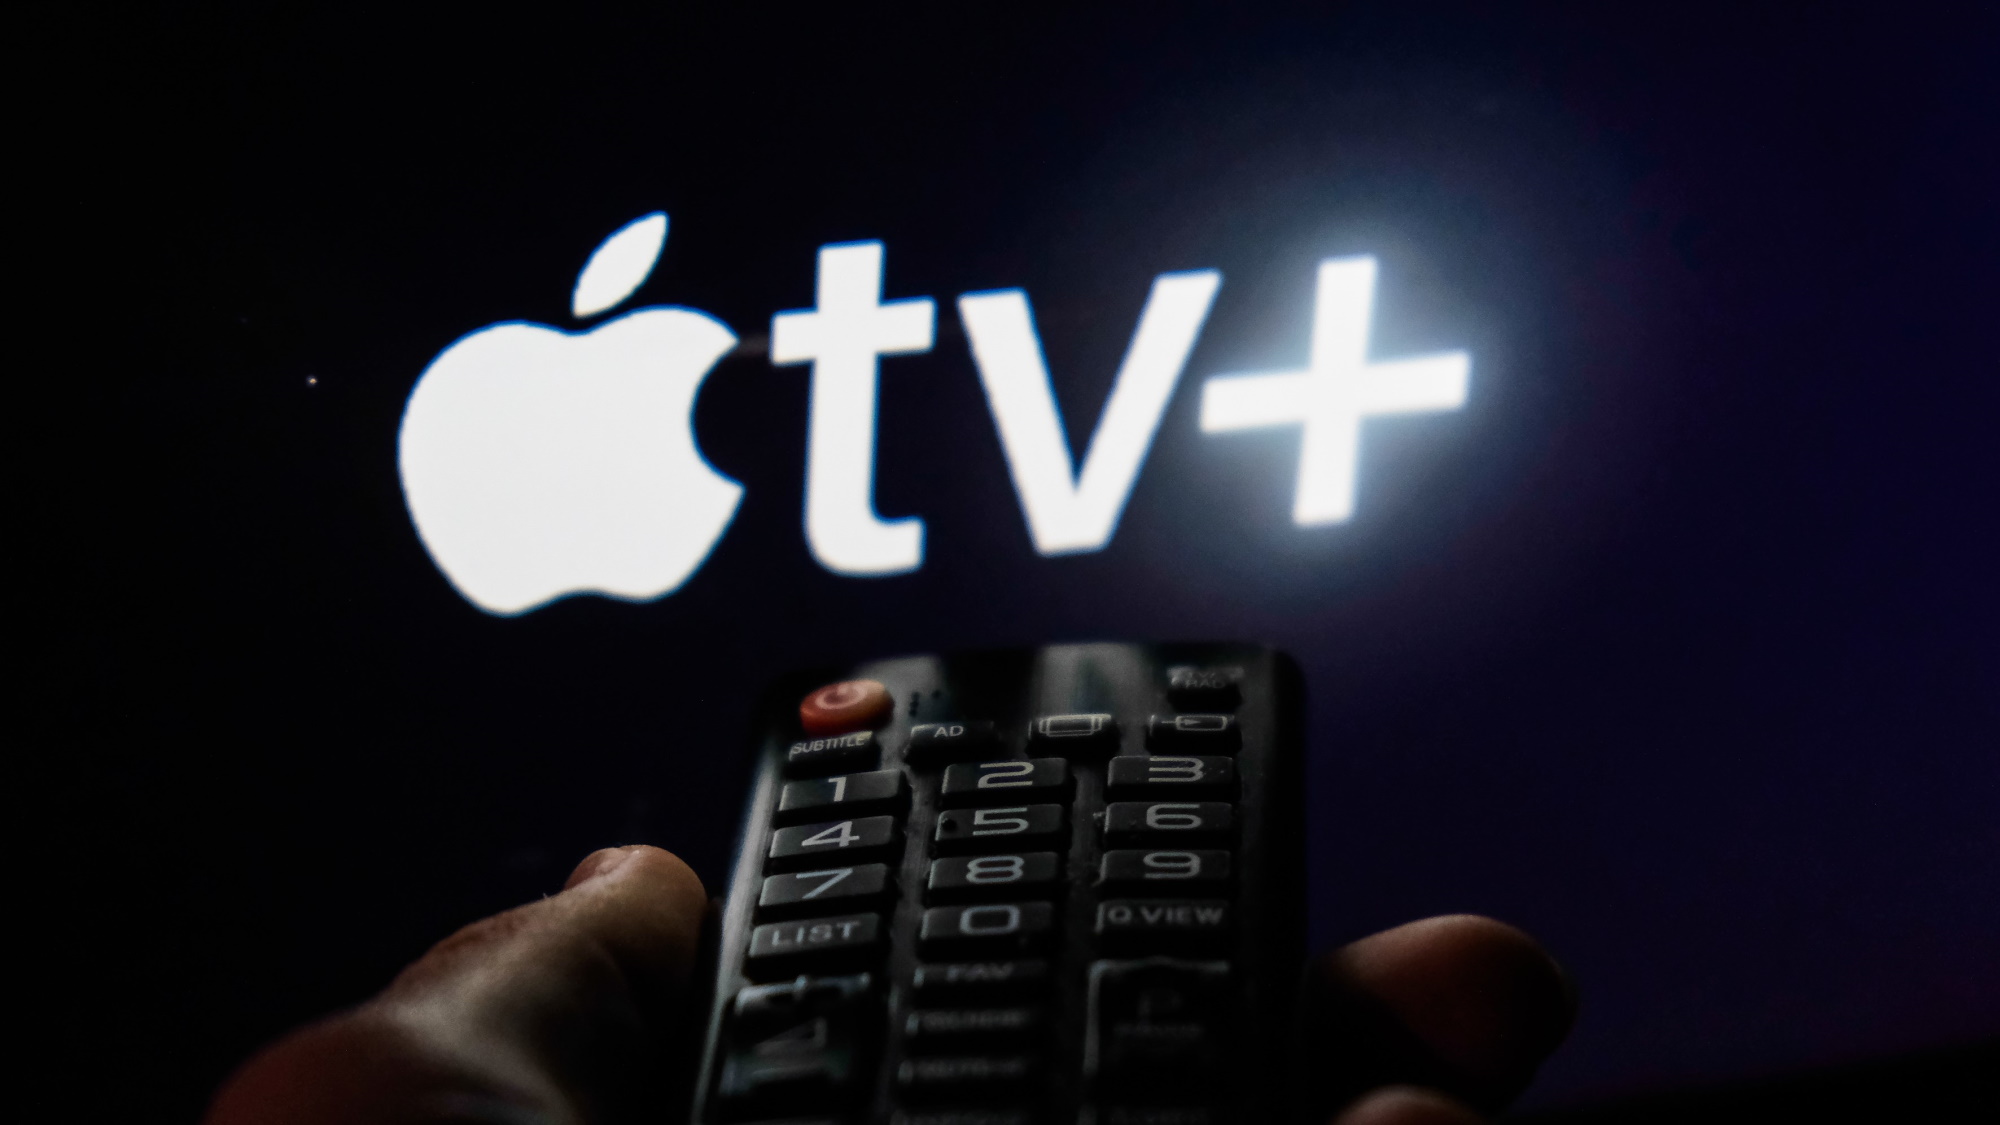 Apple TV is about get much worse for Android TV users | TechRadar